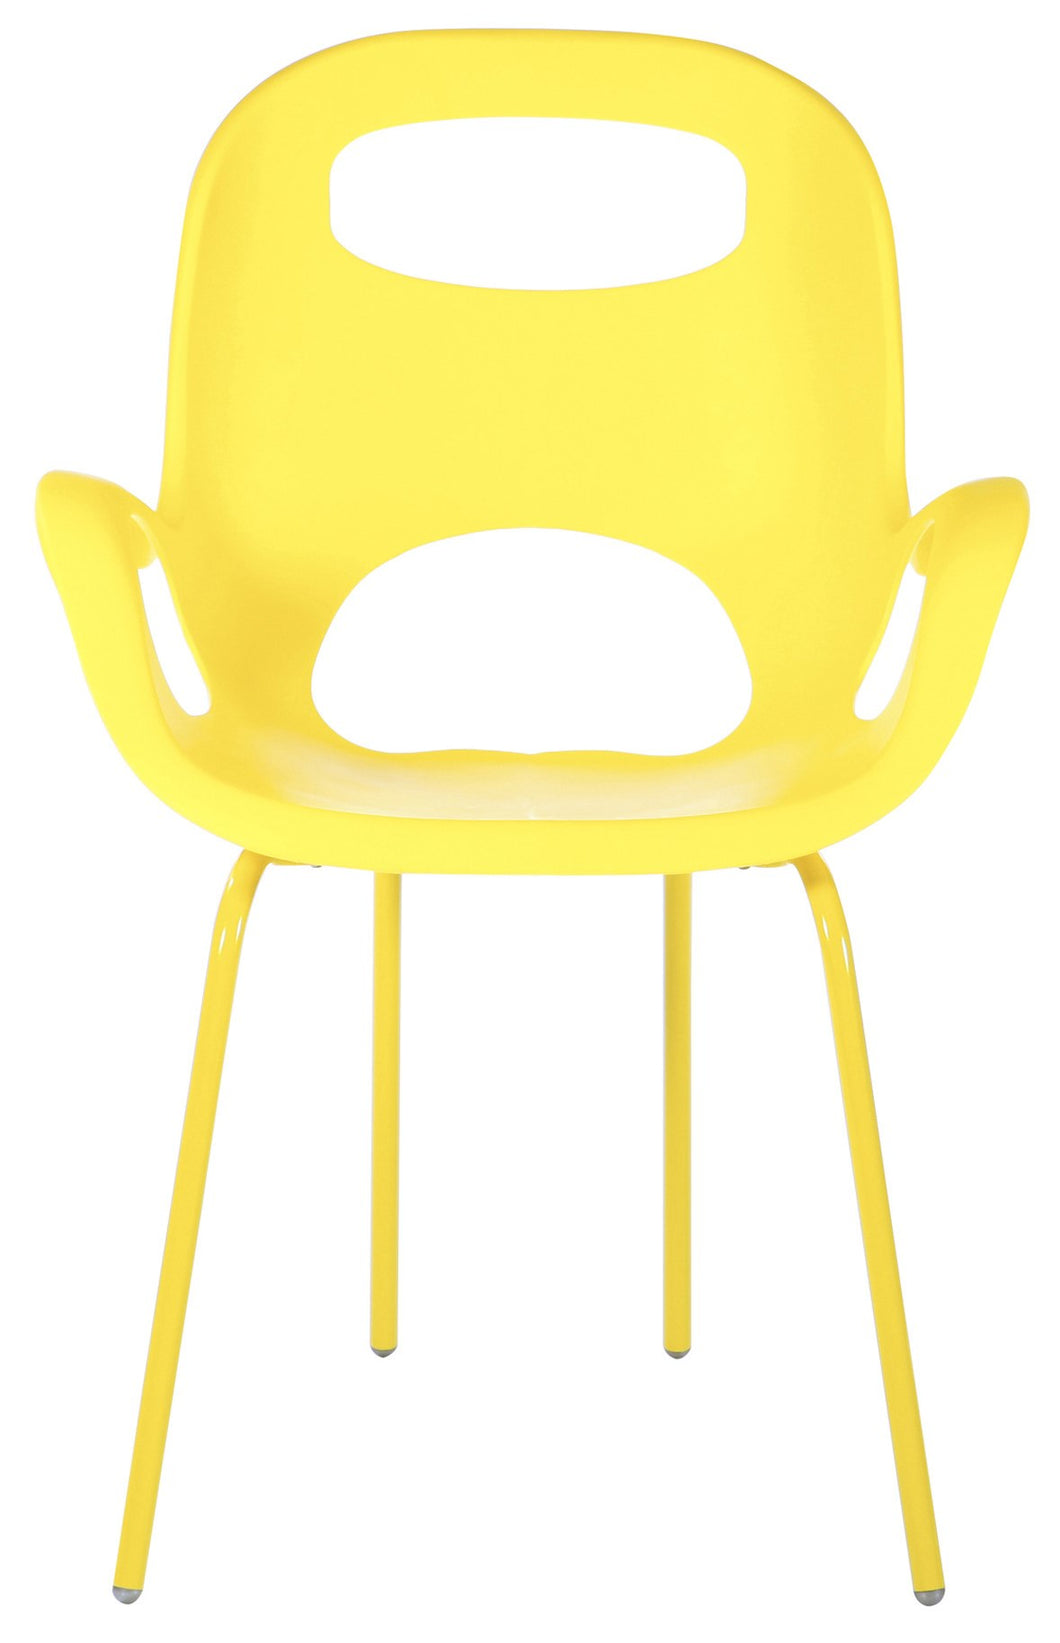 UMBRA Oh Chairs - Set of 4 - Yellow